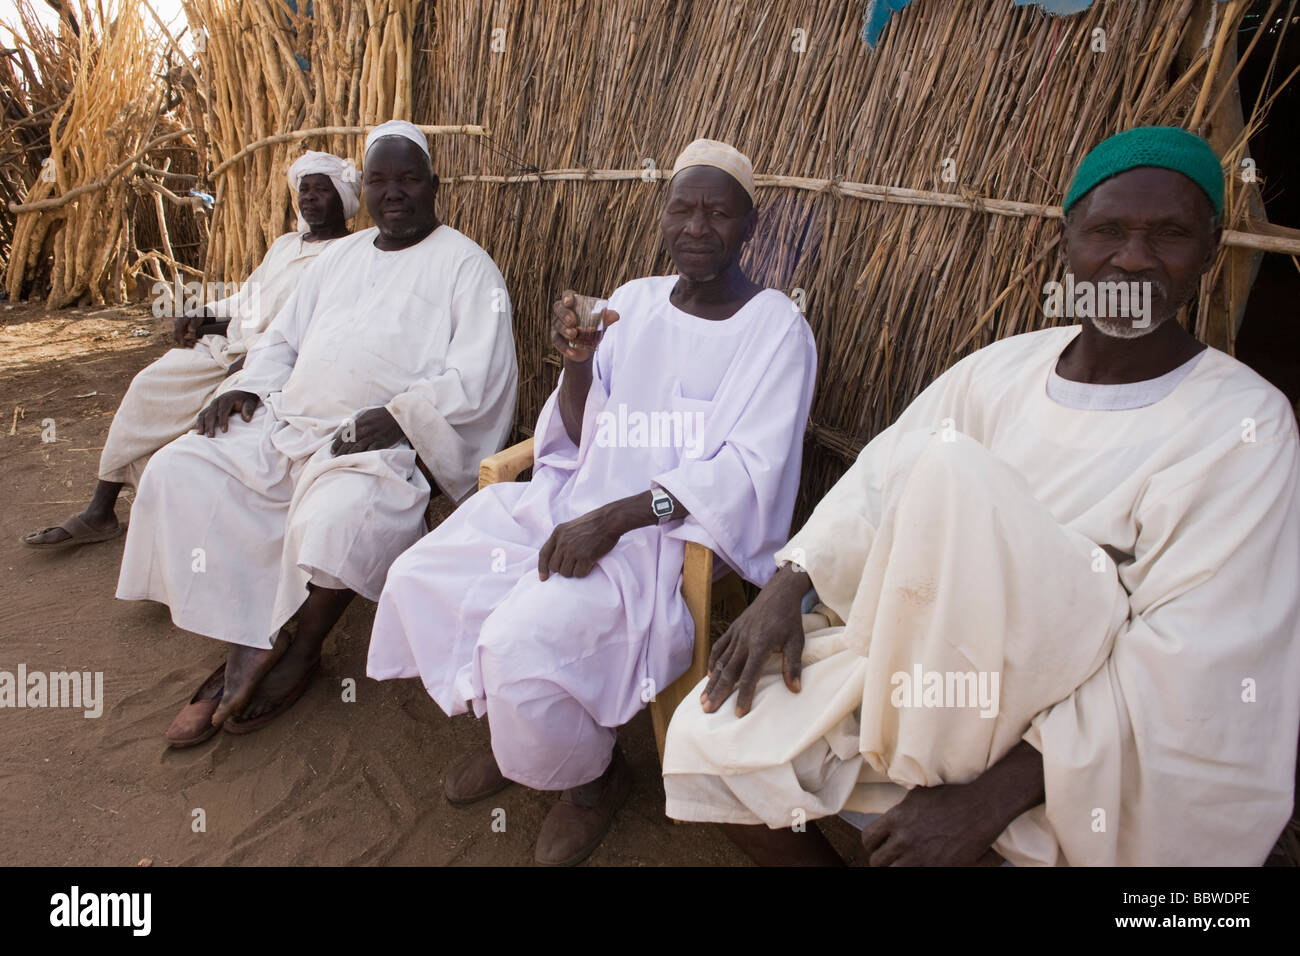 Four Sudanese gentlemen sit in the shade in the 4 sq km Abu Shouk refugee camp in Al Fasher, North Darfur, Sudan Stock Photo